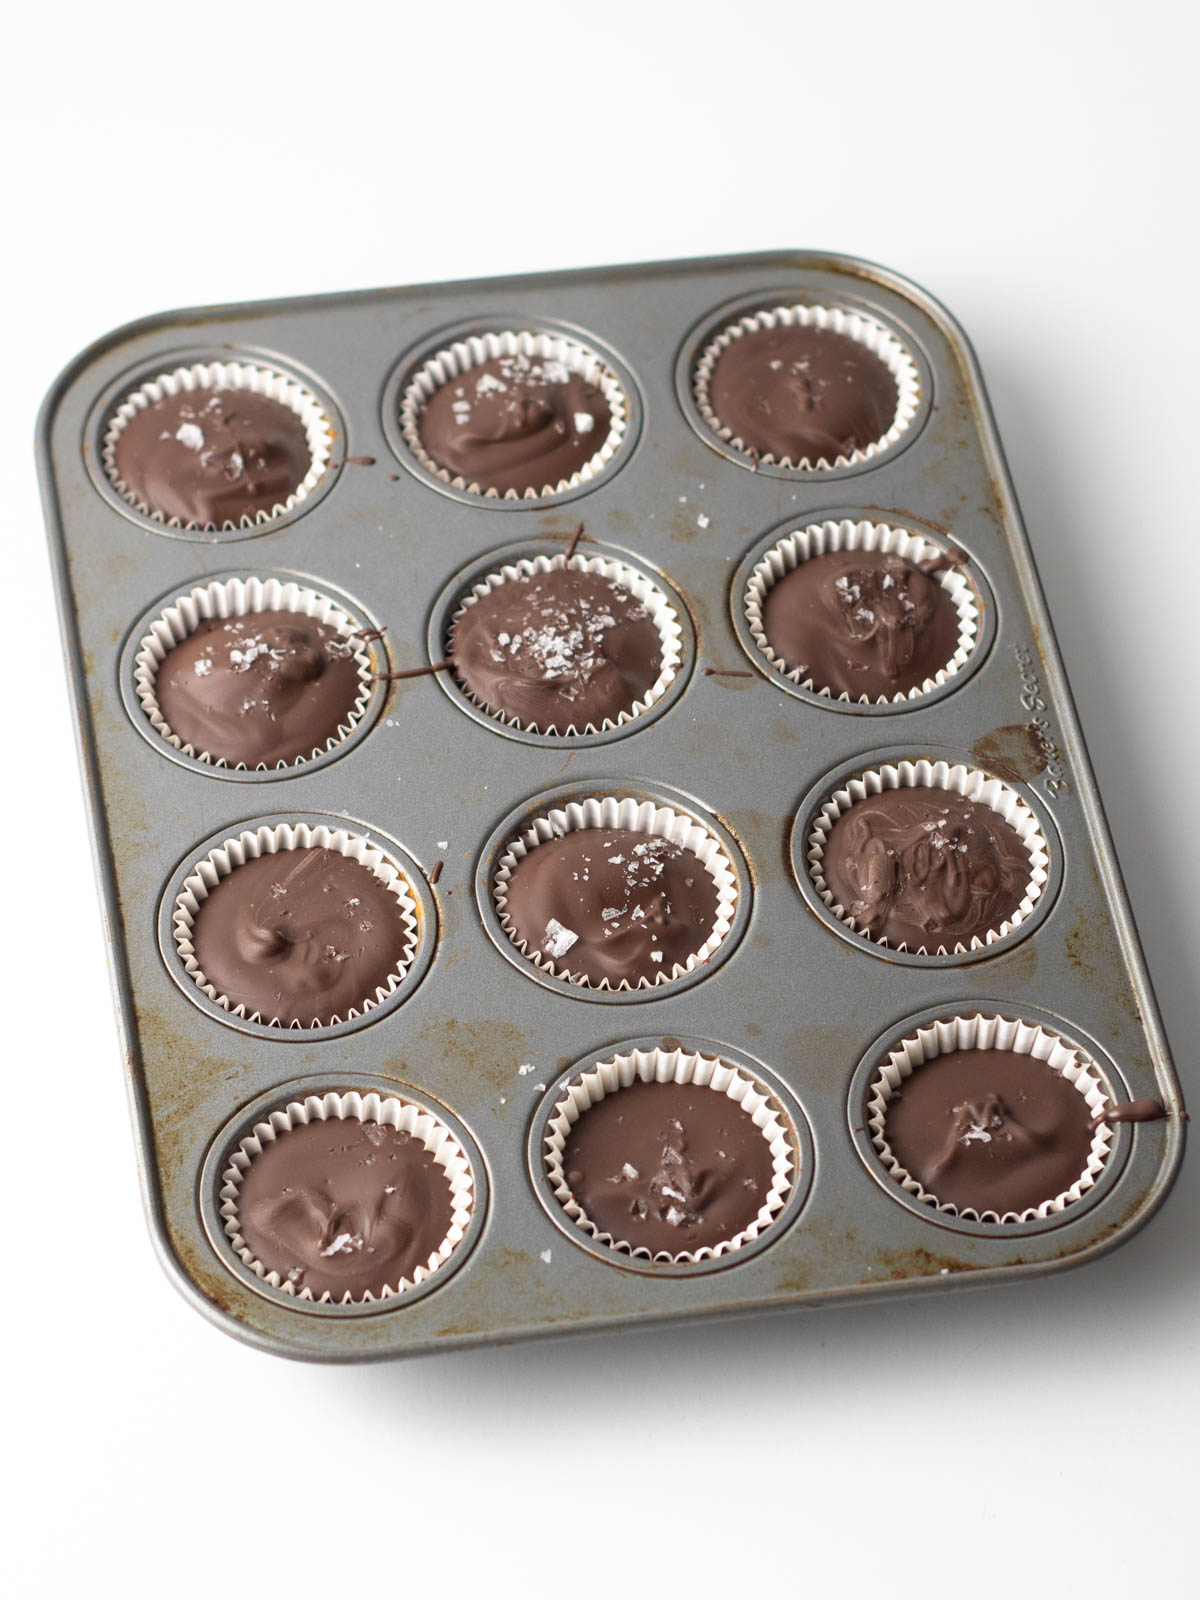 Nutella cups topped with sea salt in a 12 cup mini muffin tin.